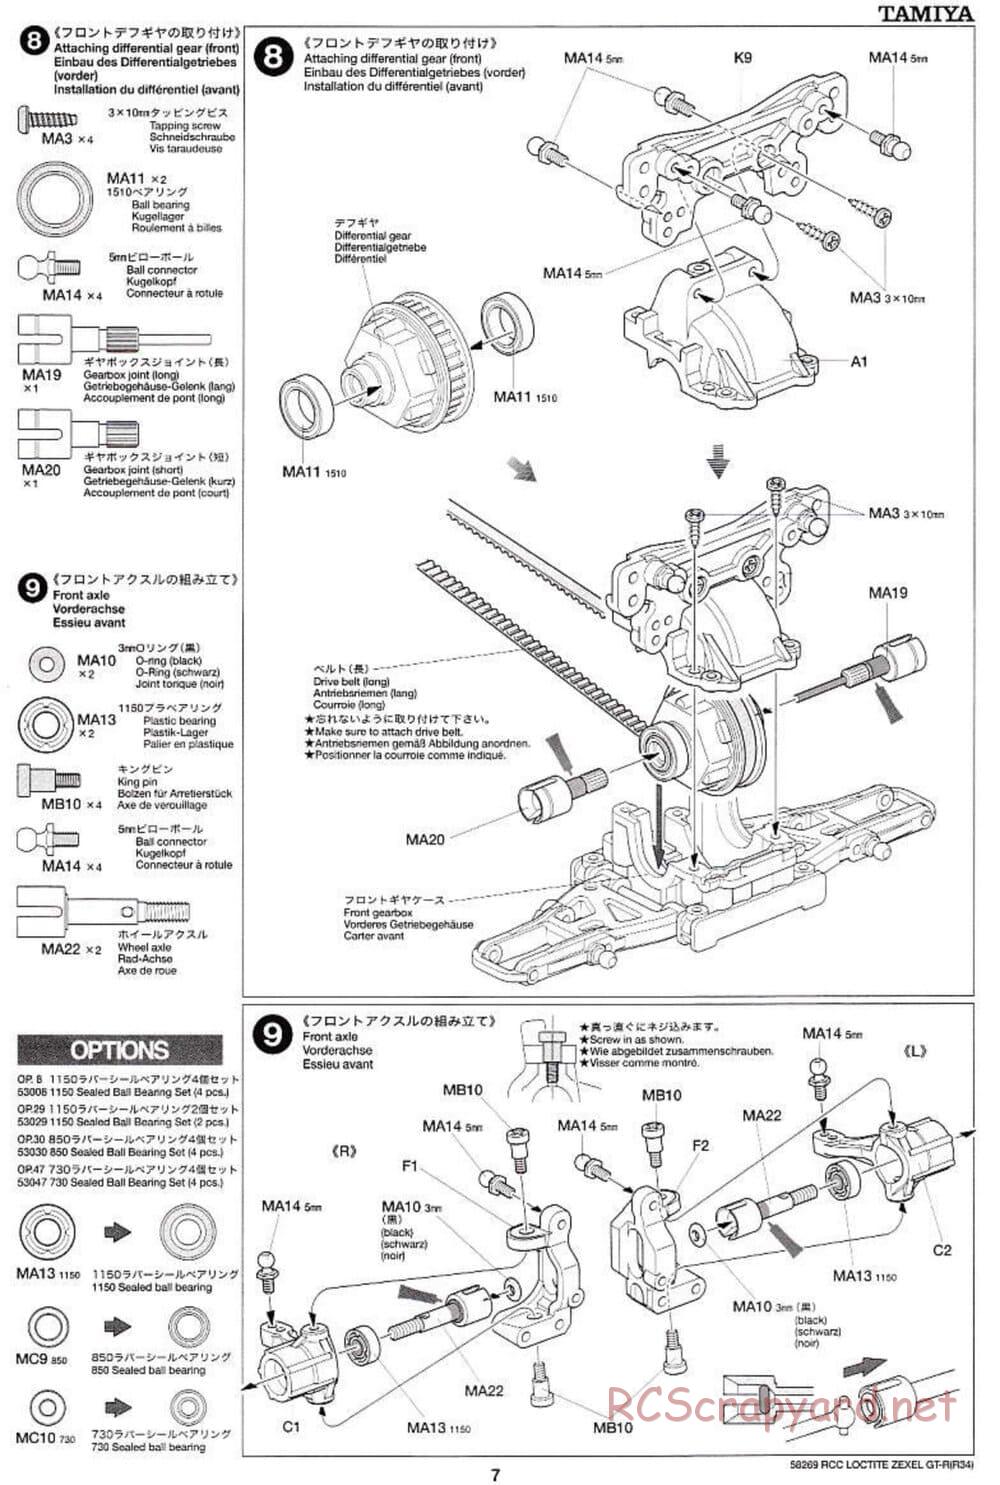 Tamiya - Loctite Zexel Skyline GT-R (R34) - TA-04 Chassis - Manual - Page 7